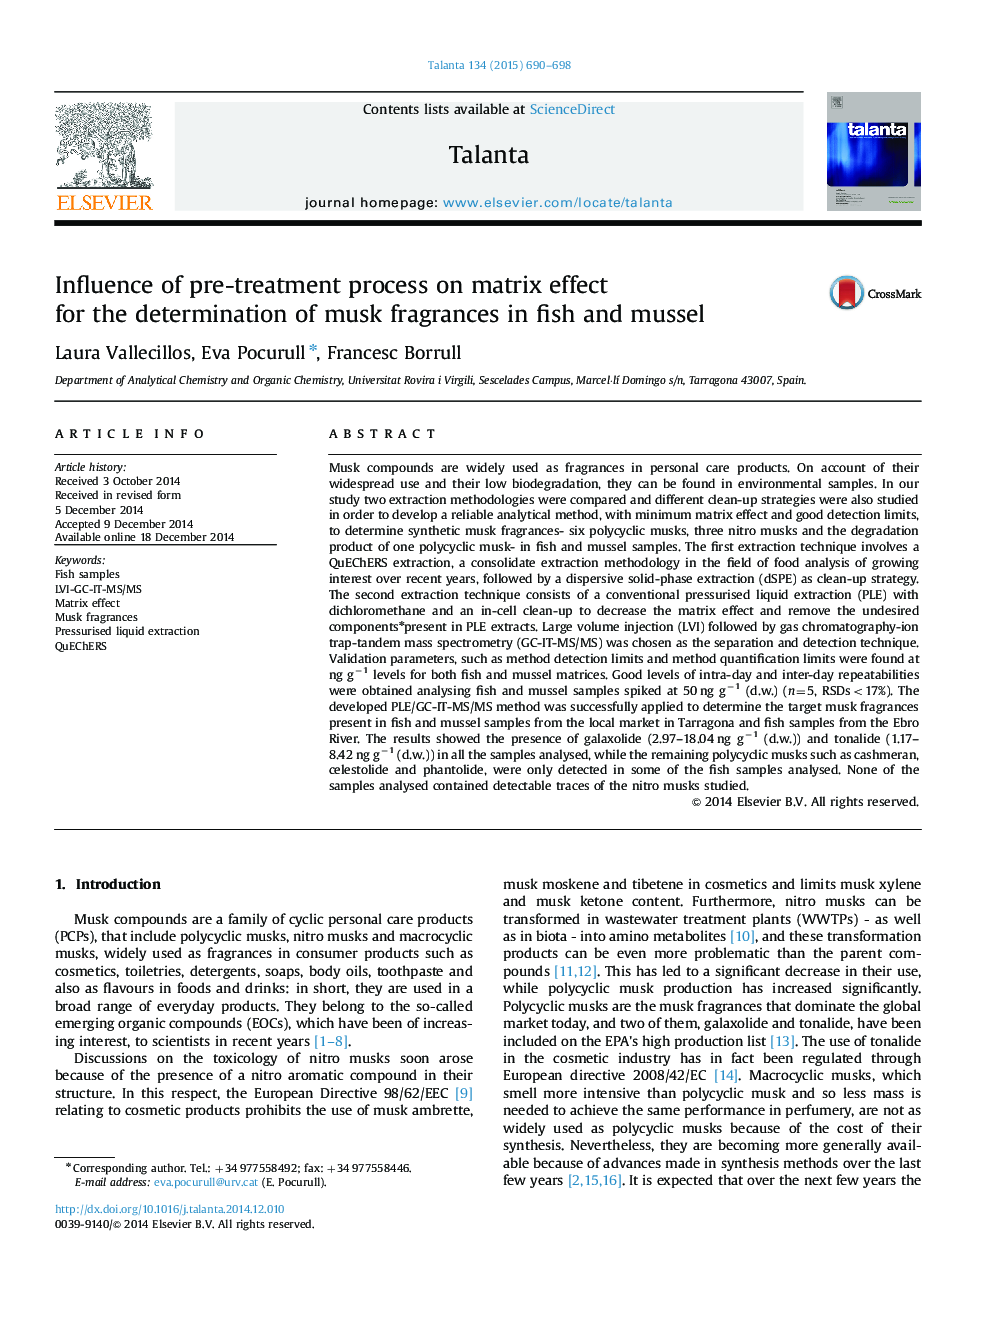 Influence of pre-treatment process on matrix effect for the determination of musk fragrances in fish and mussel